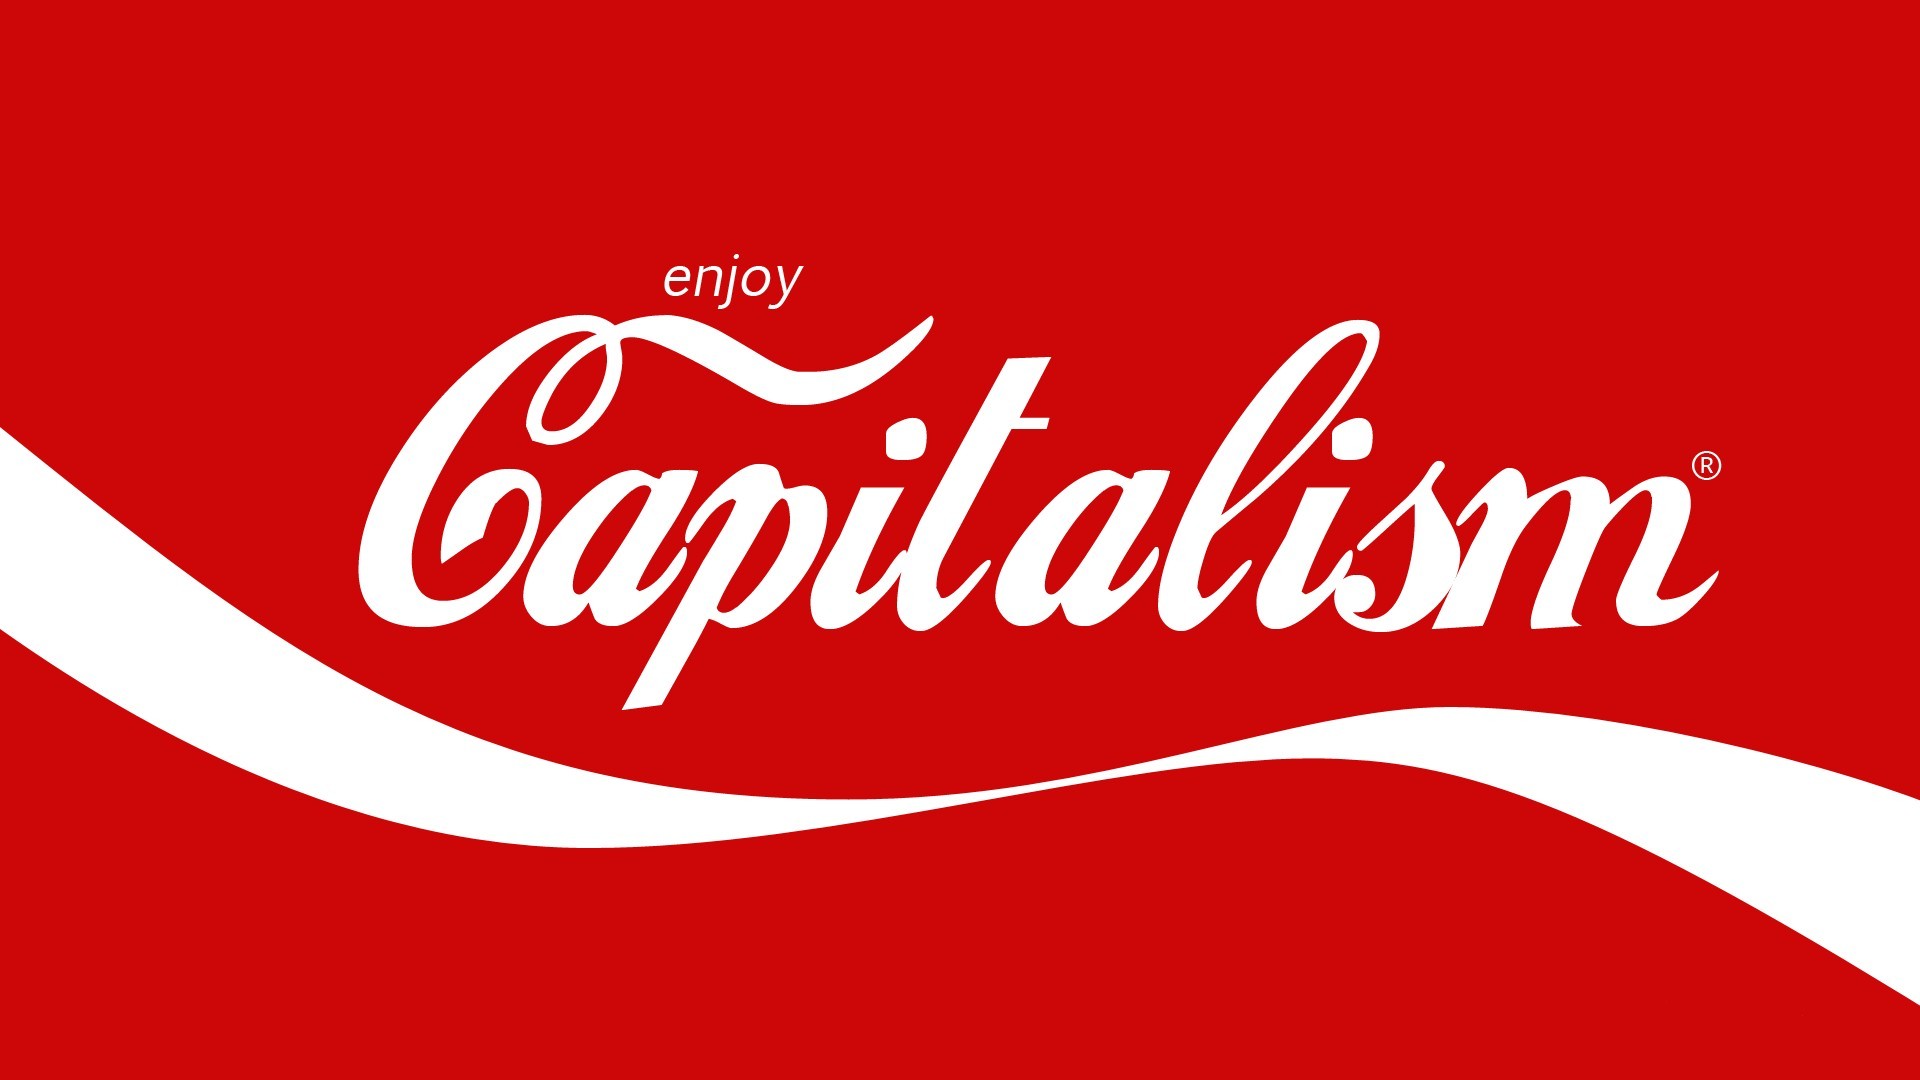 1920x1080  primary colors capitalism coca cola red white wallpaper and  background JPG 140 kB